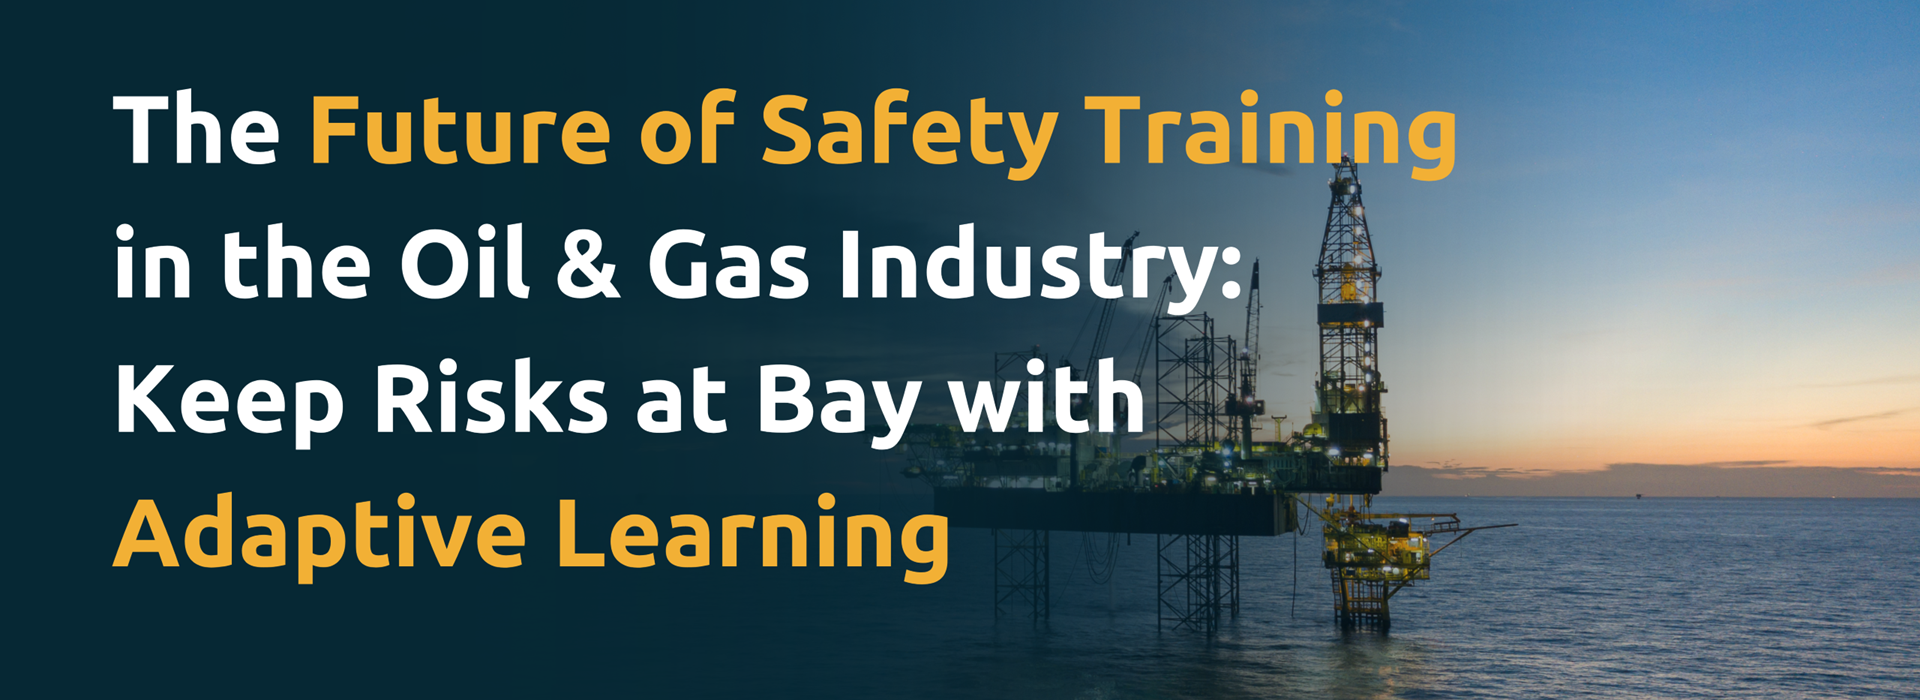 The Future Of Safety Training Oil & Gas